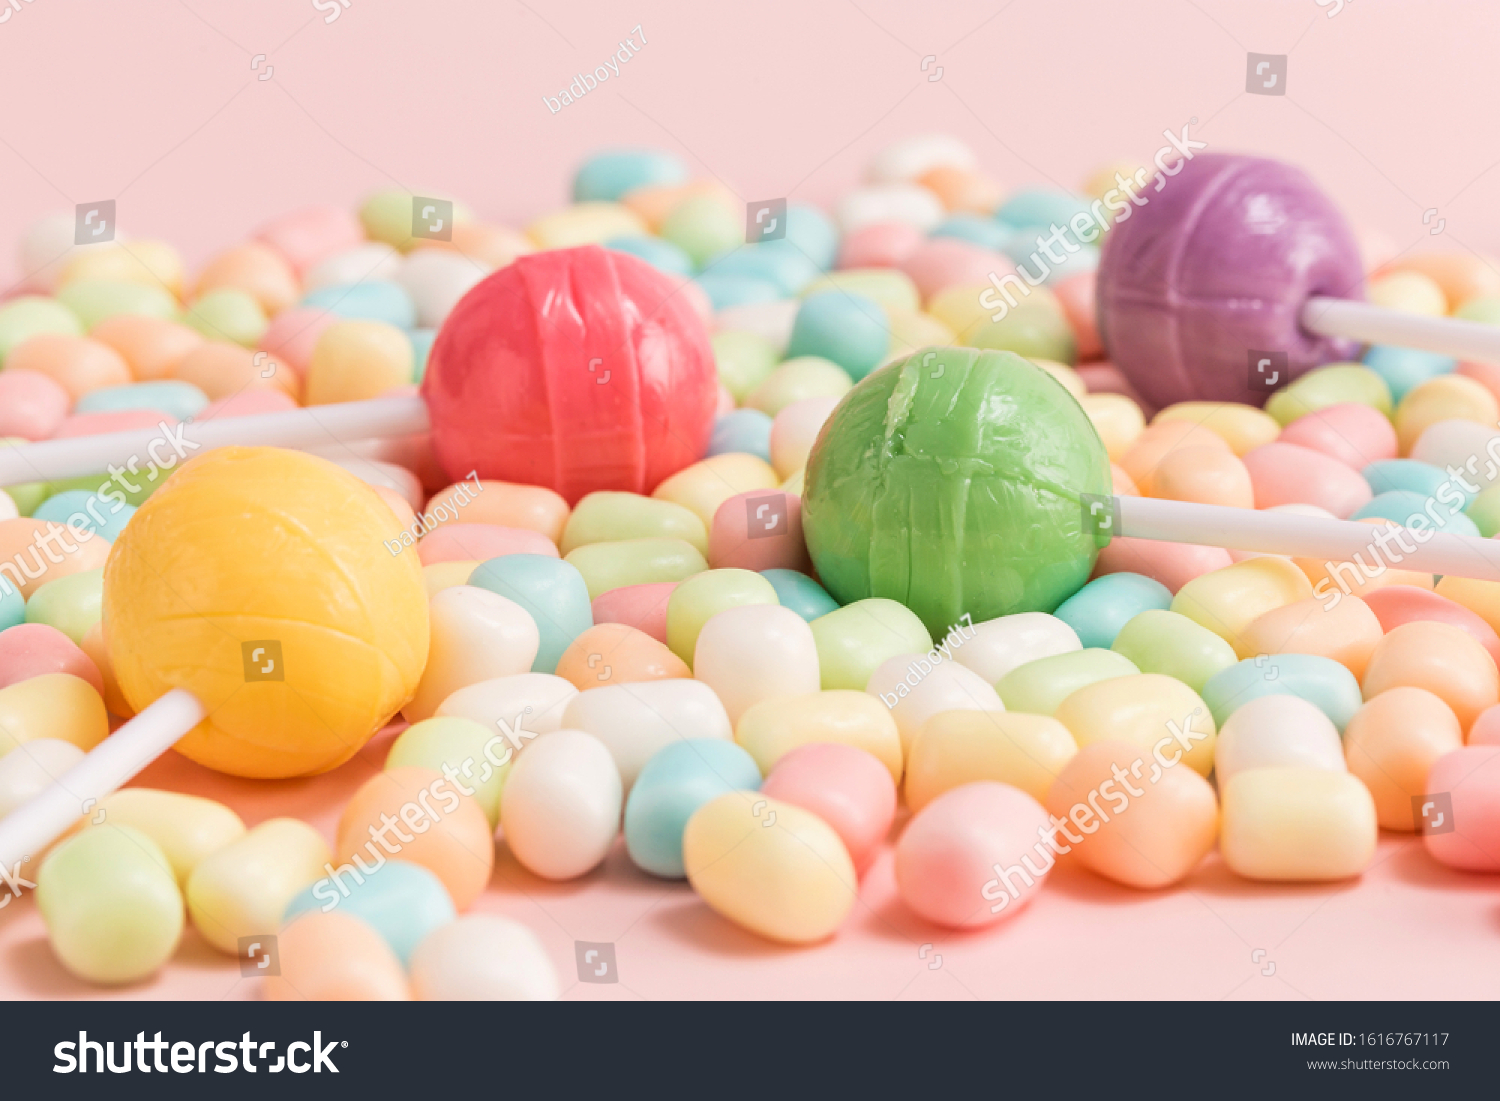 Many types, many flavors and many colors of candy #1616767117